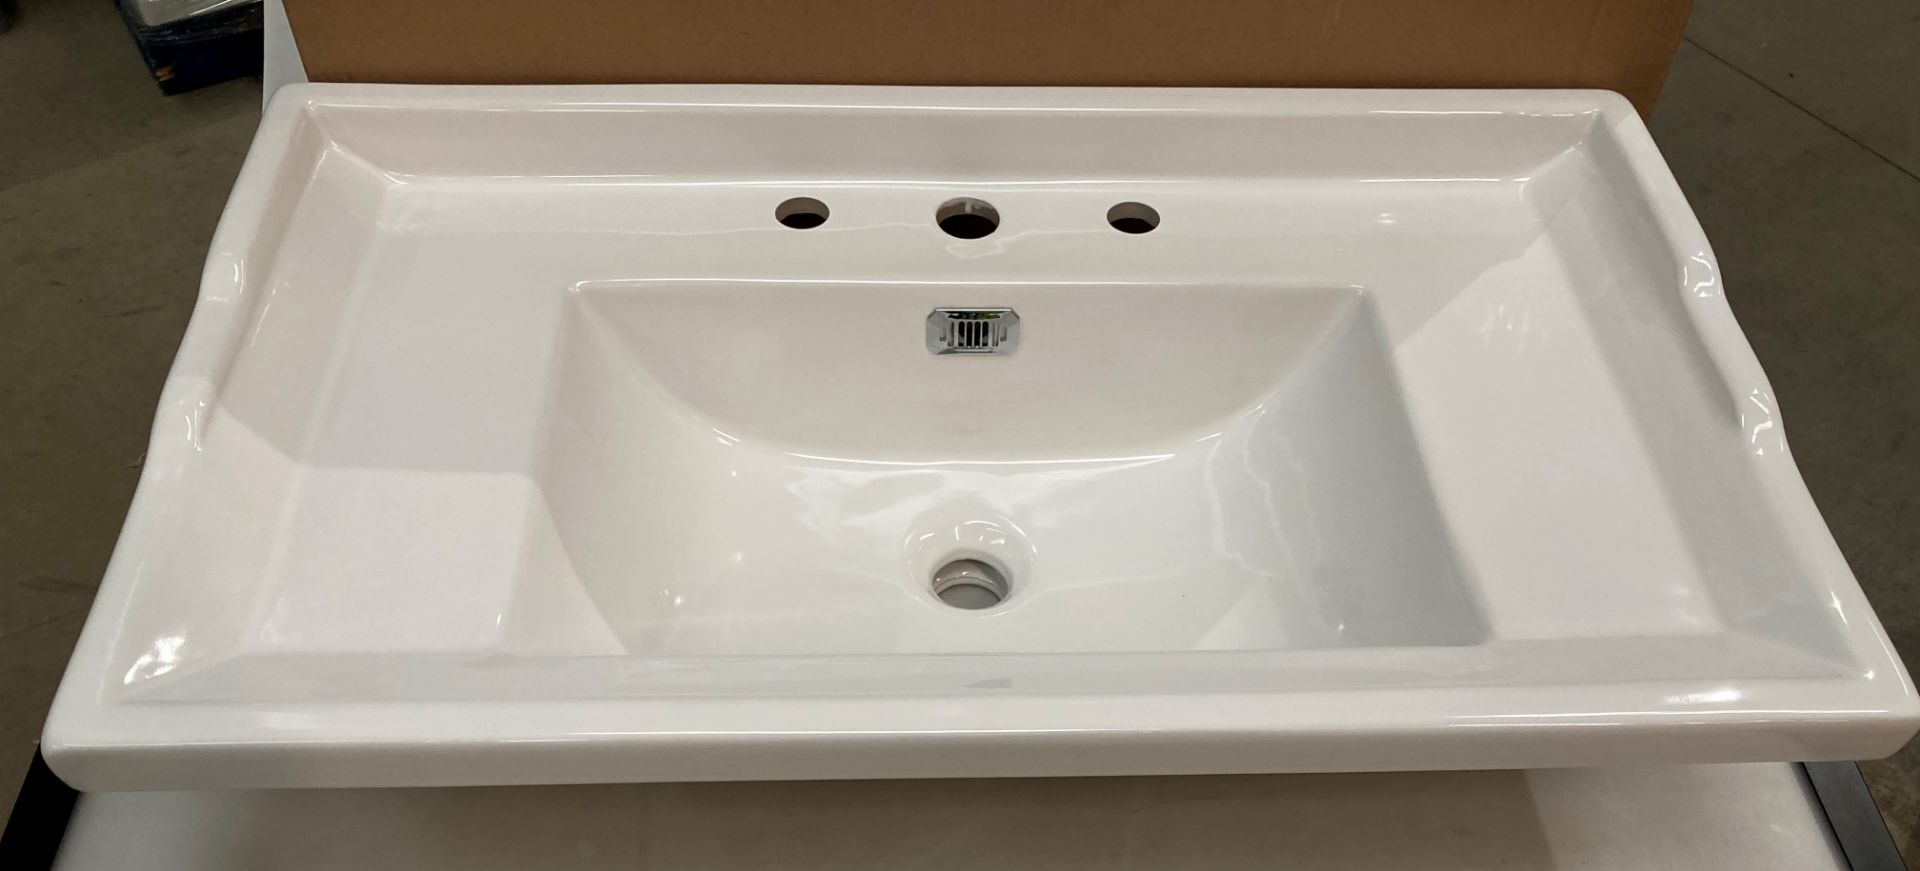 2 x 800mm traditional basin 3T/H size 820mm x 480mm x 220mm